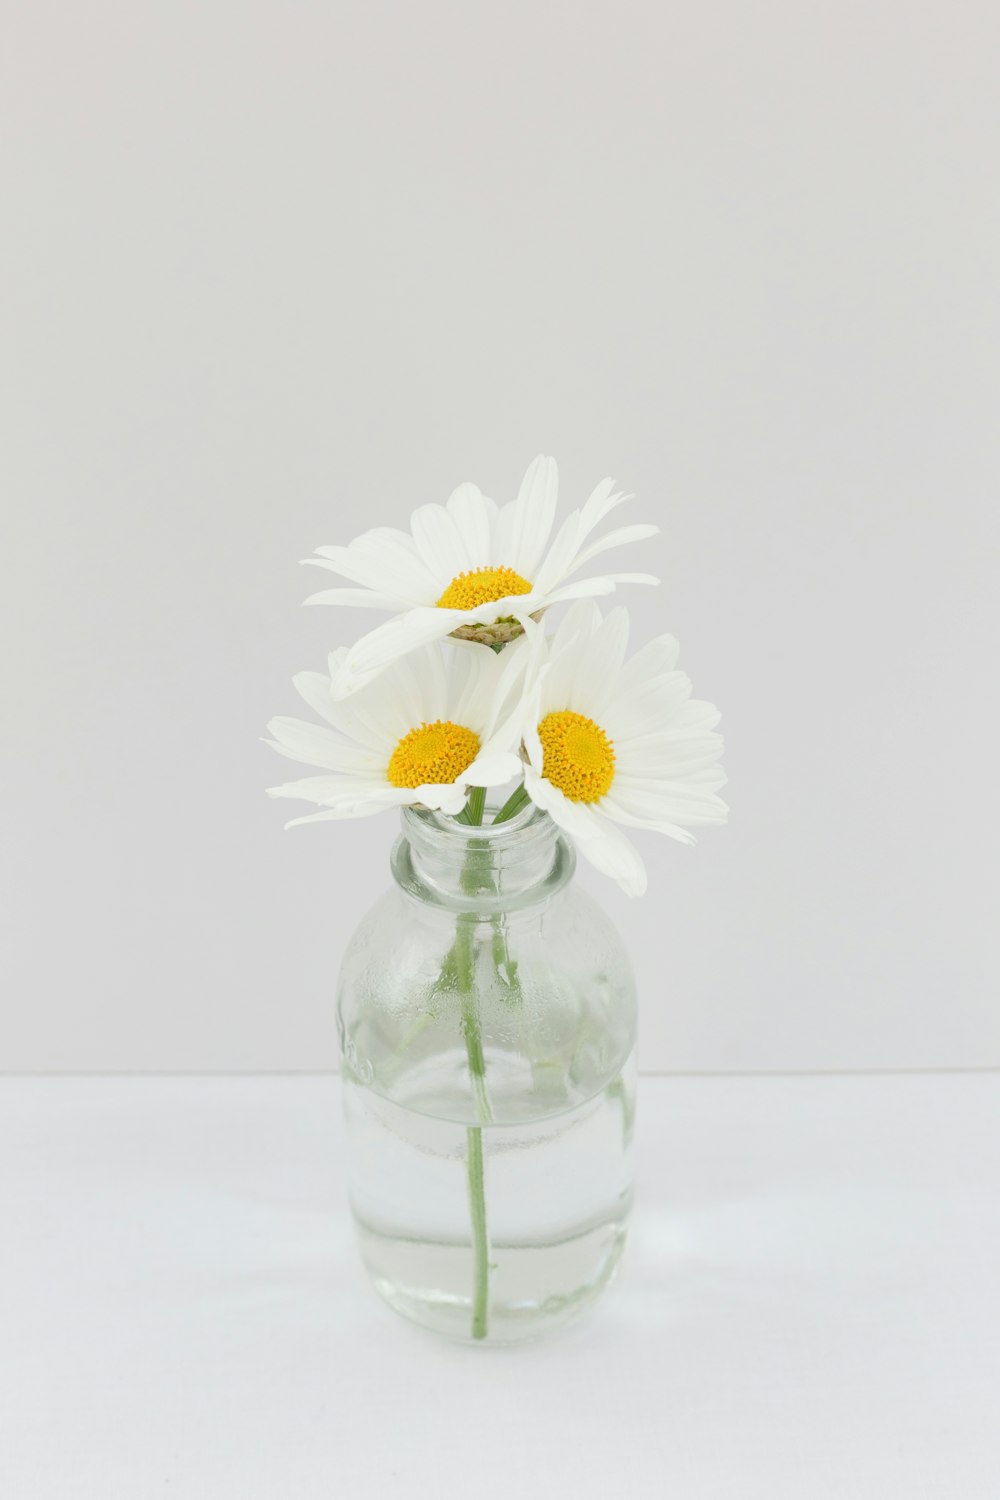 a glass vase with some daisies in it